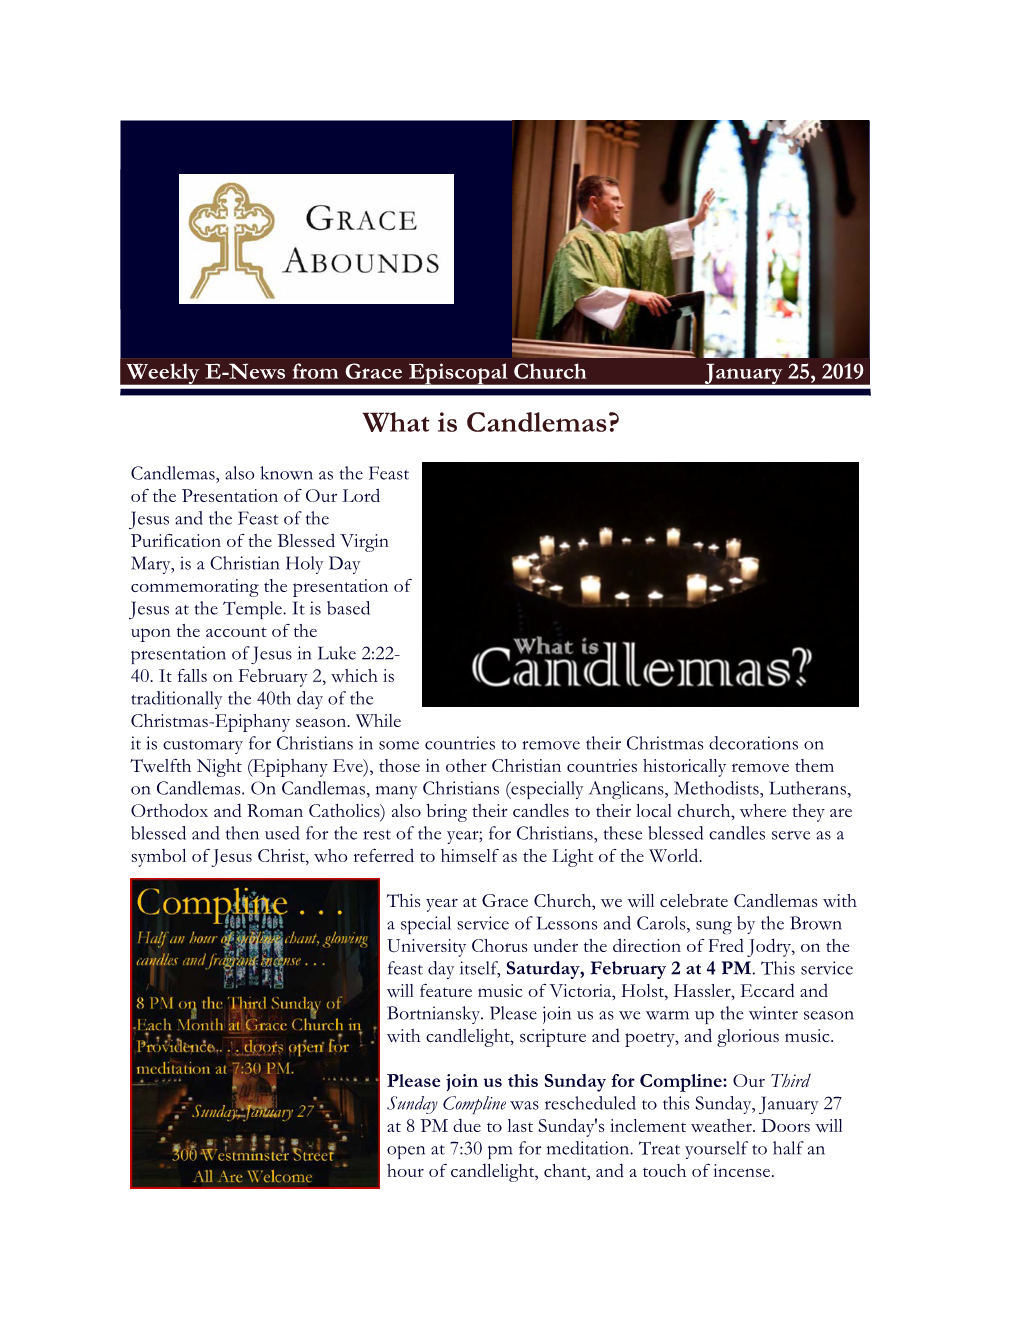 January 25, 2019 – What Is Candlemas?